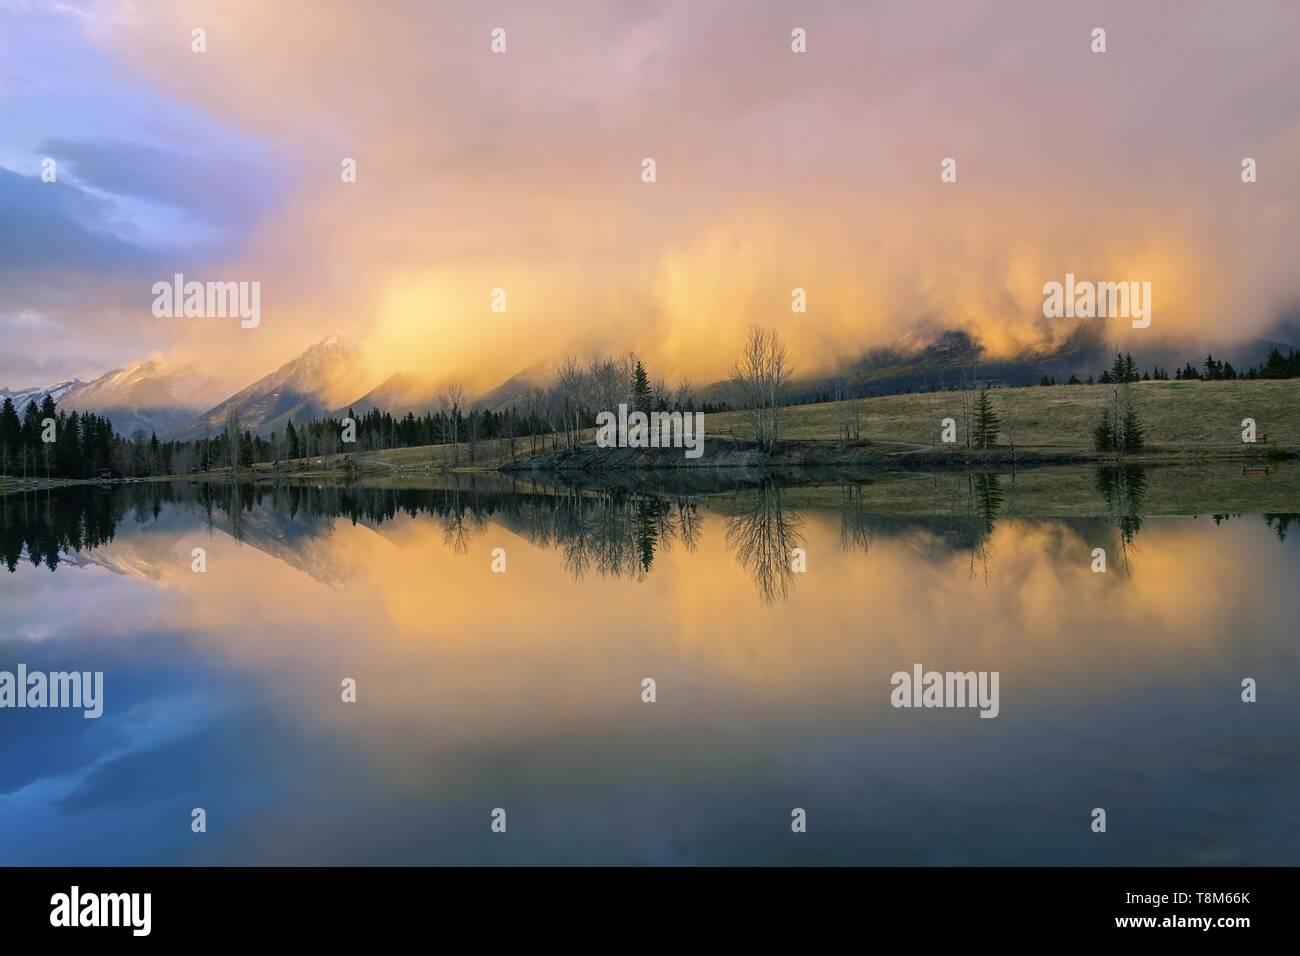 Springtime Mountain Landscape and Dramatic Sunset Colors. Quarry Lake, City of Canmore, Alberta Foothills, Canadian Rockies, Banff National Park Stock Photo